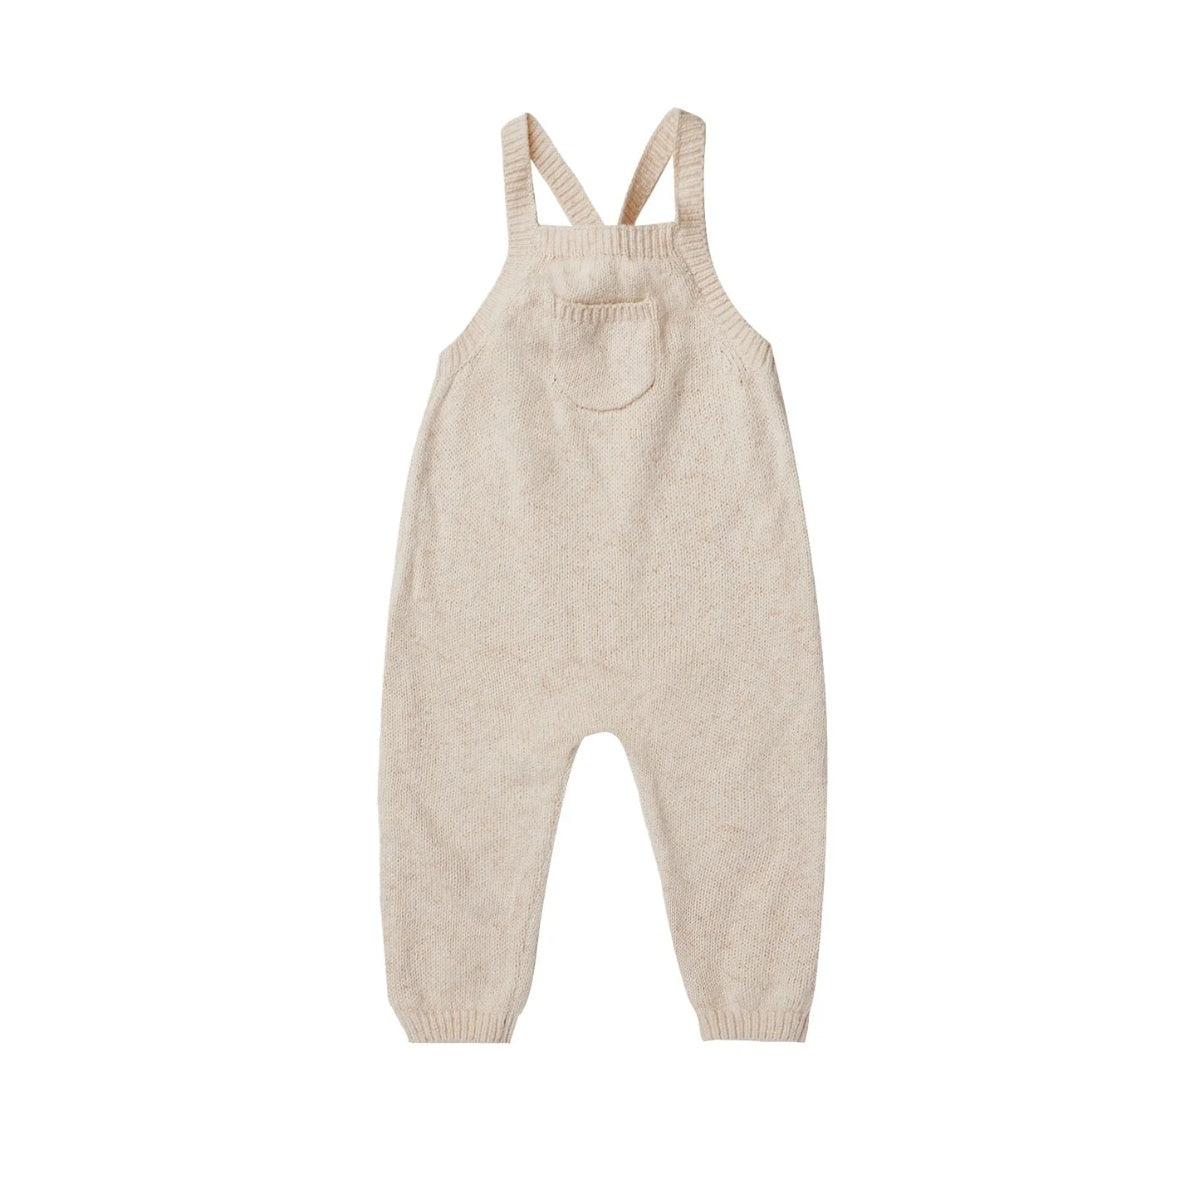 Knit overall - Natural heather